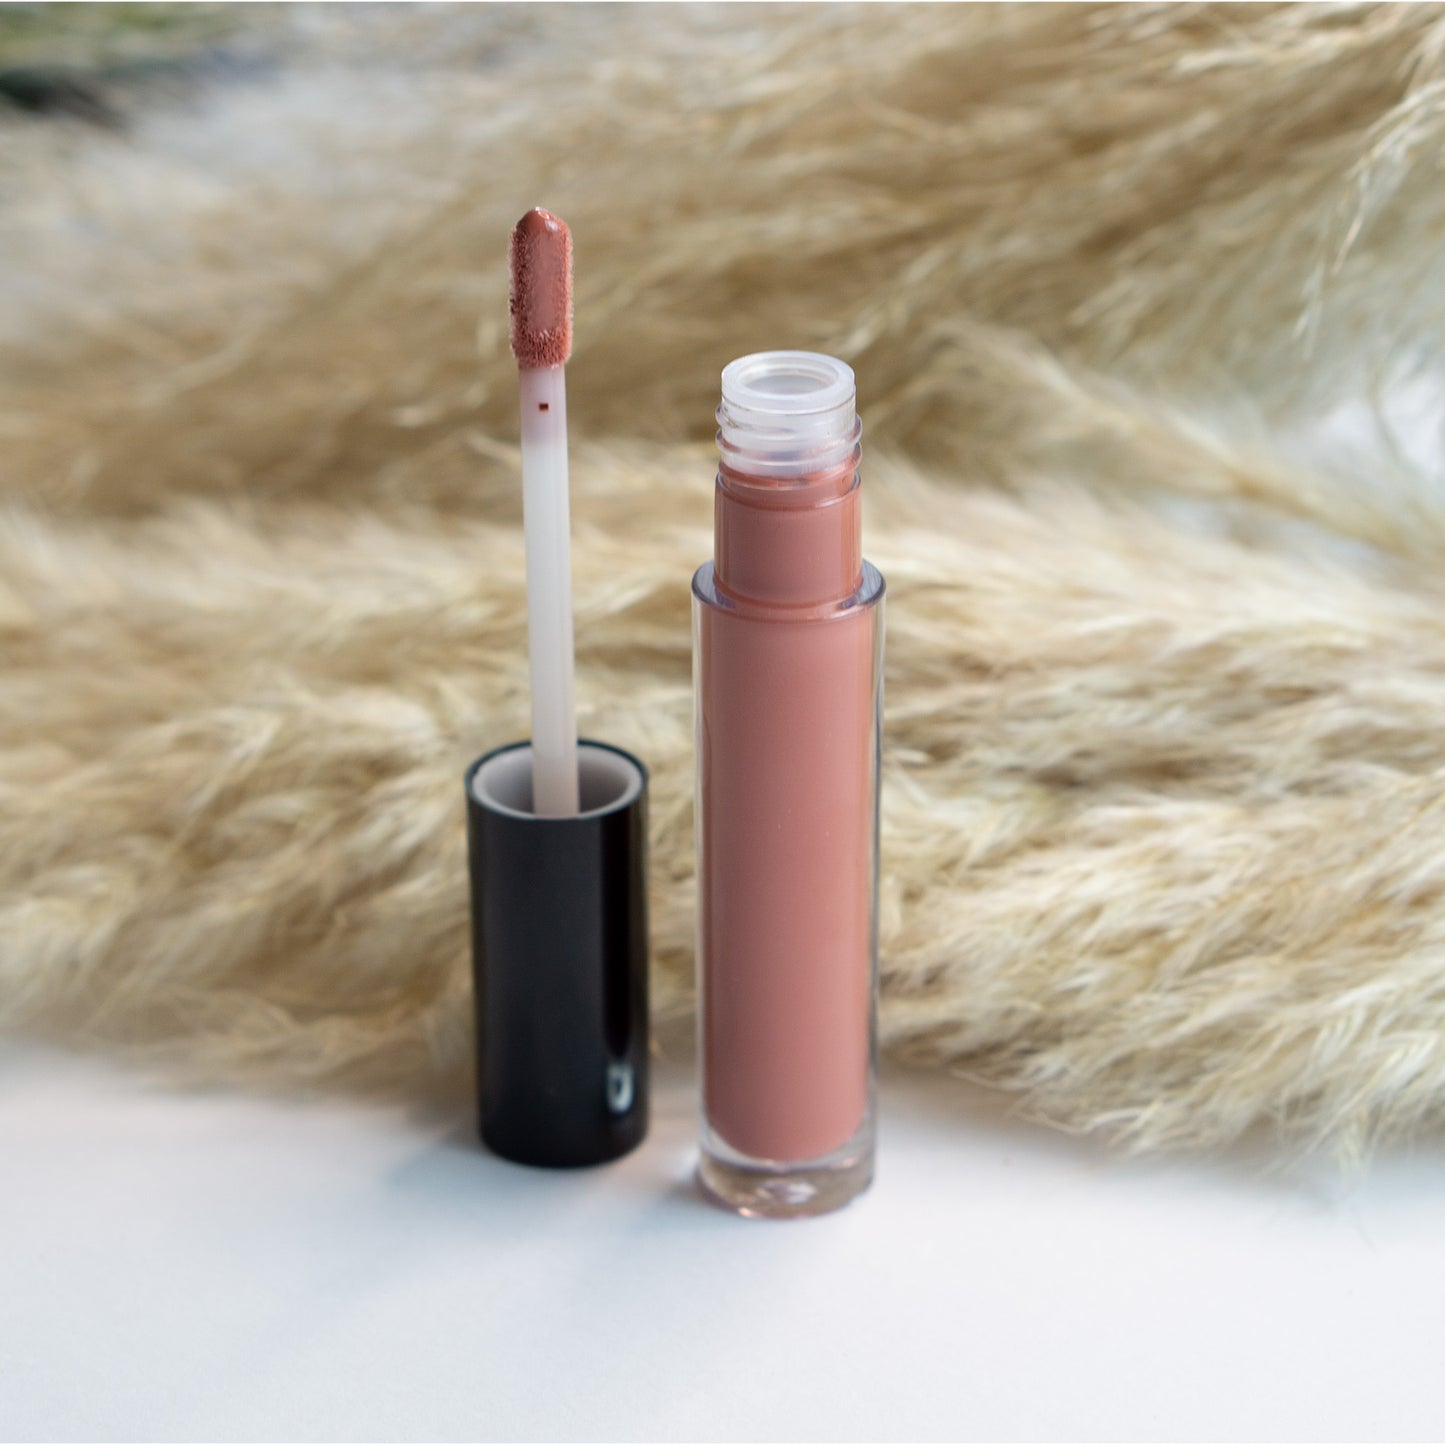 Pink Lip Gloss by Cruisin Organics. This lip gloss, with its pink hue, delivers a refreshing sheen while delivering much-needed moisture. Cruisin Organics' indispensable product will keep your lips feeling and looking amazing.